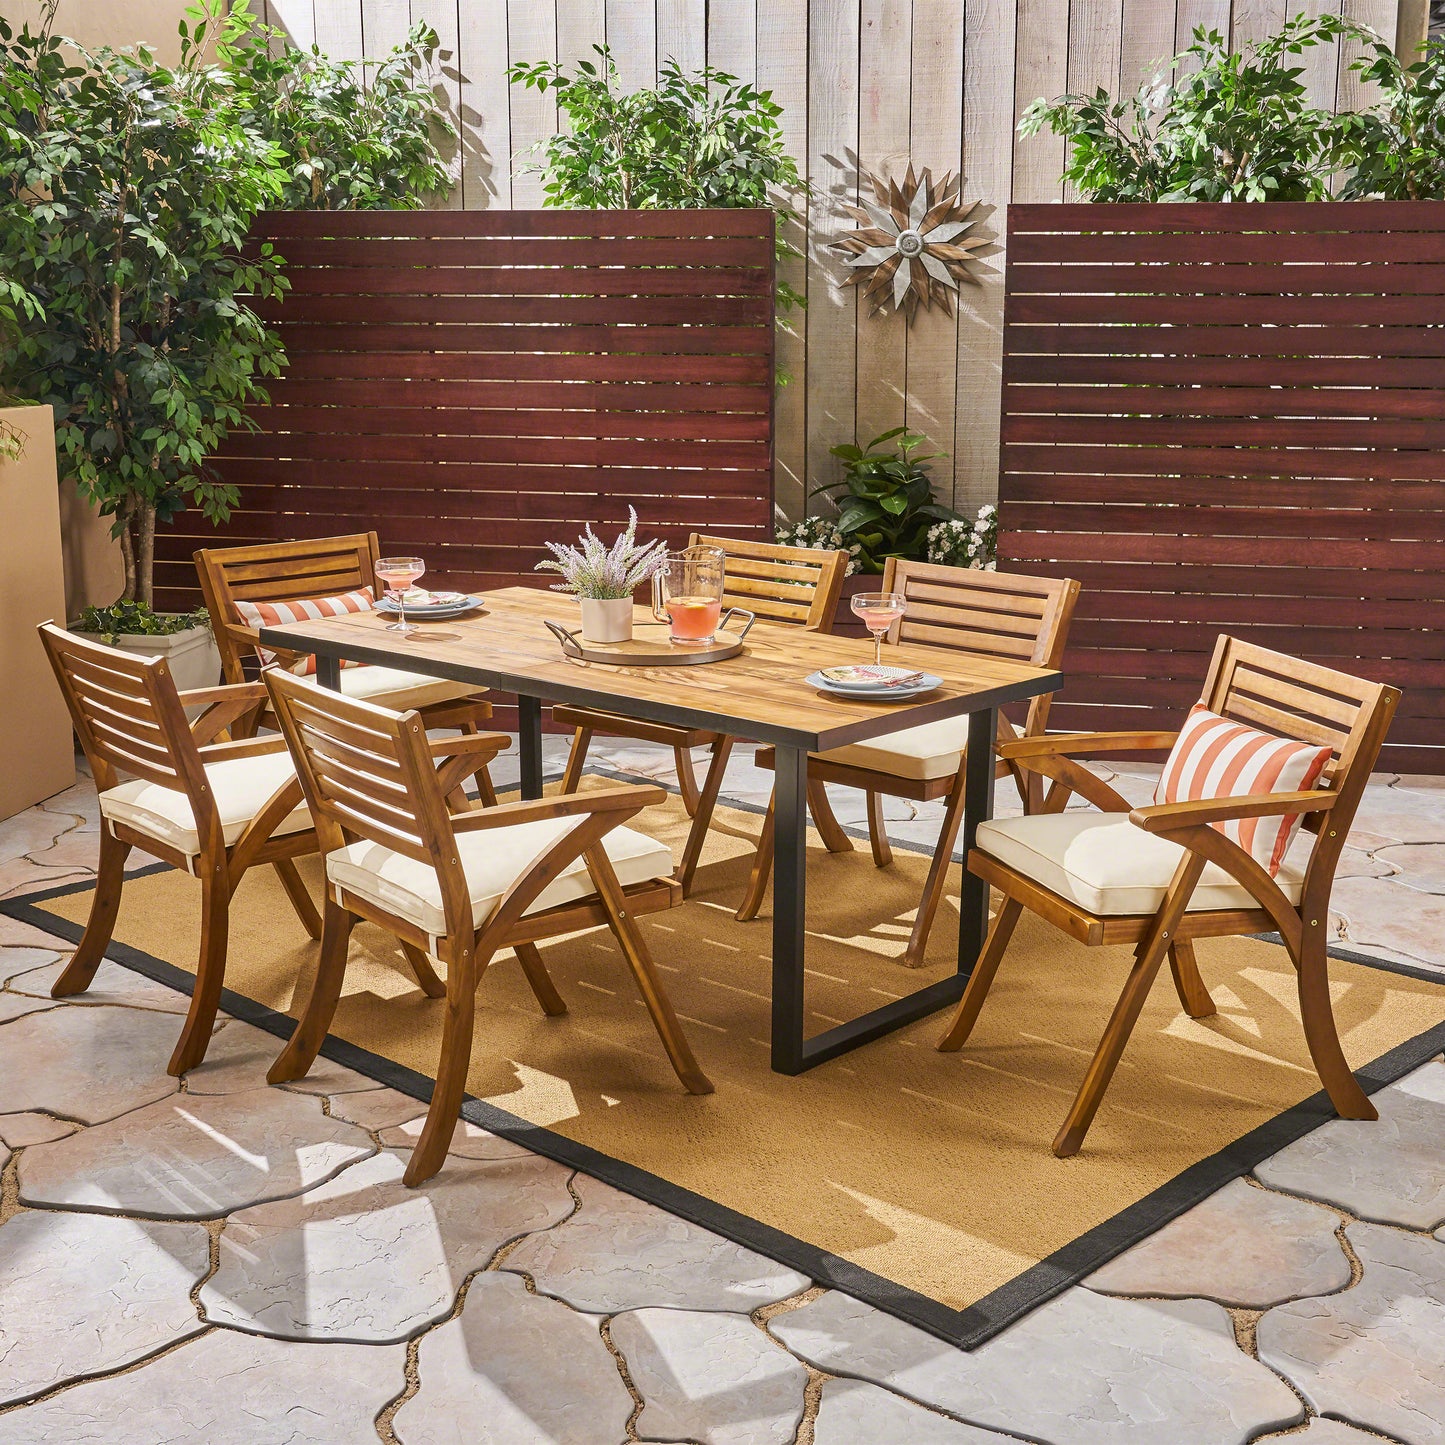 Daisy Outdoor 6-Seater Rectangular Acacia Wood and Iron Dining Set, Teak with Black and Cream